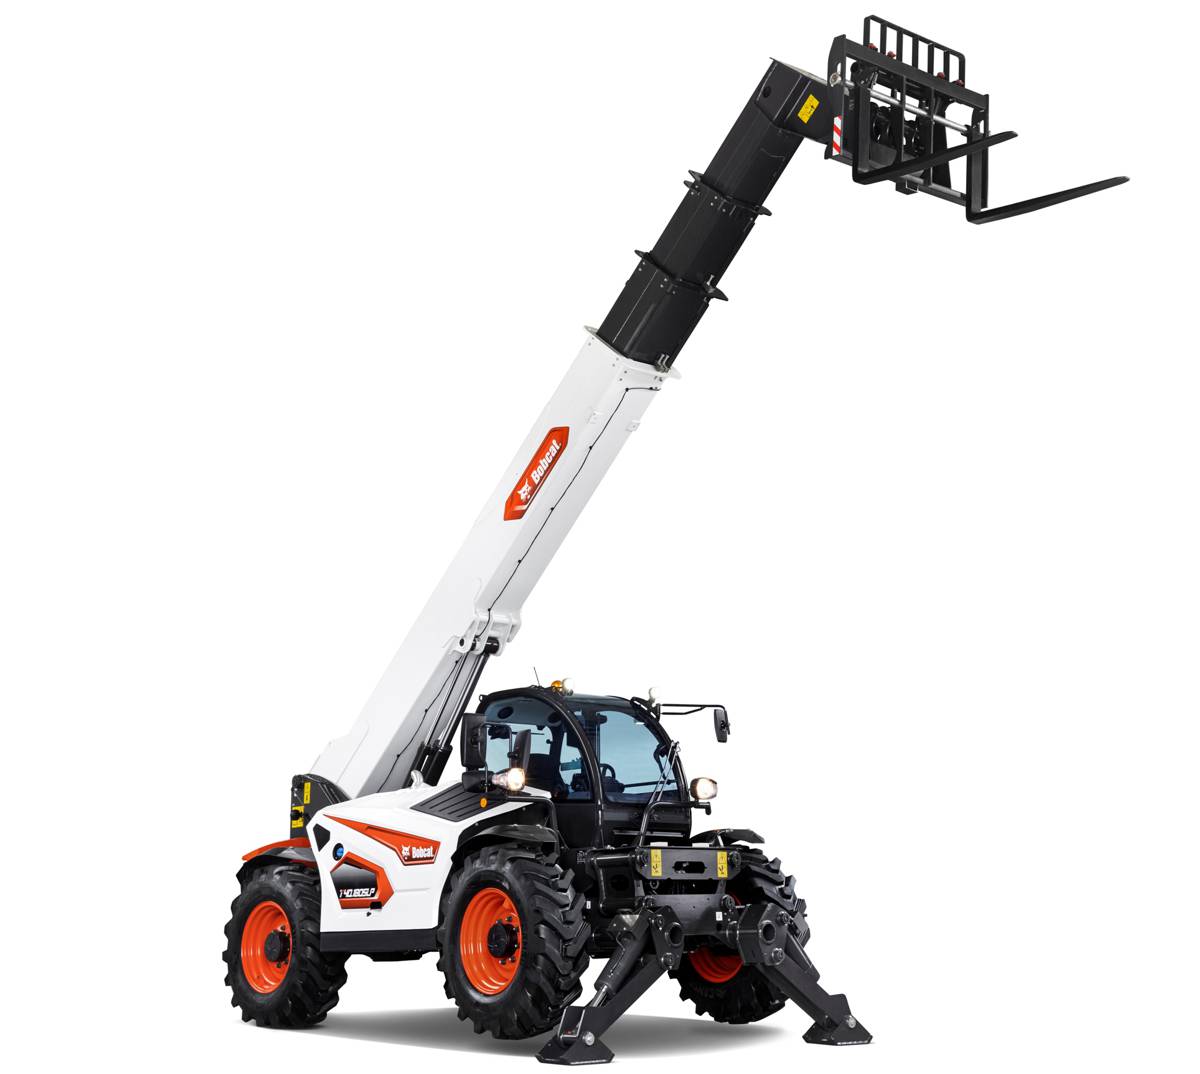 Bobcat launches new generation of R-Series Telehandlers